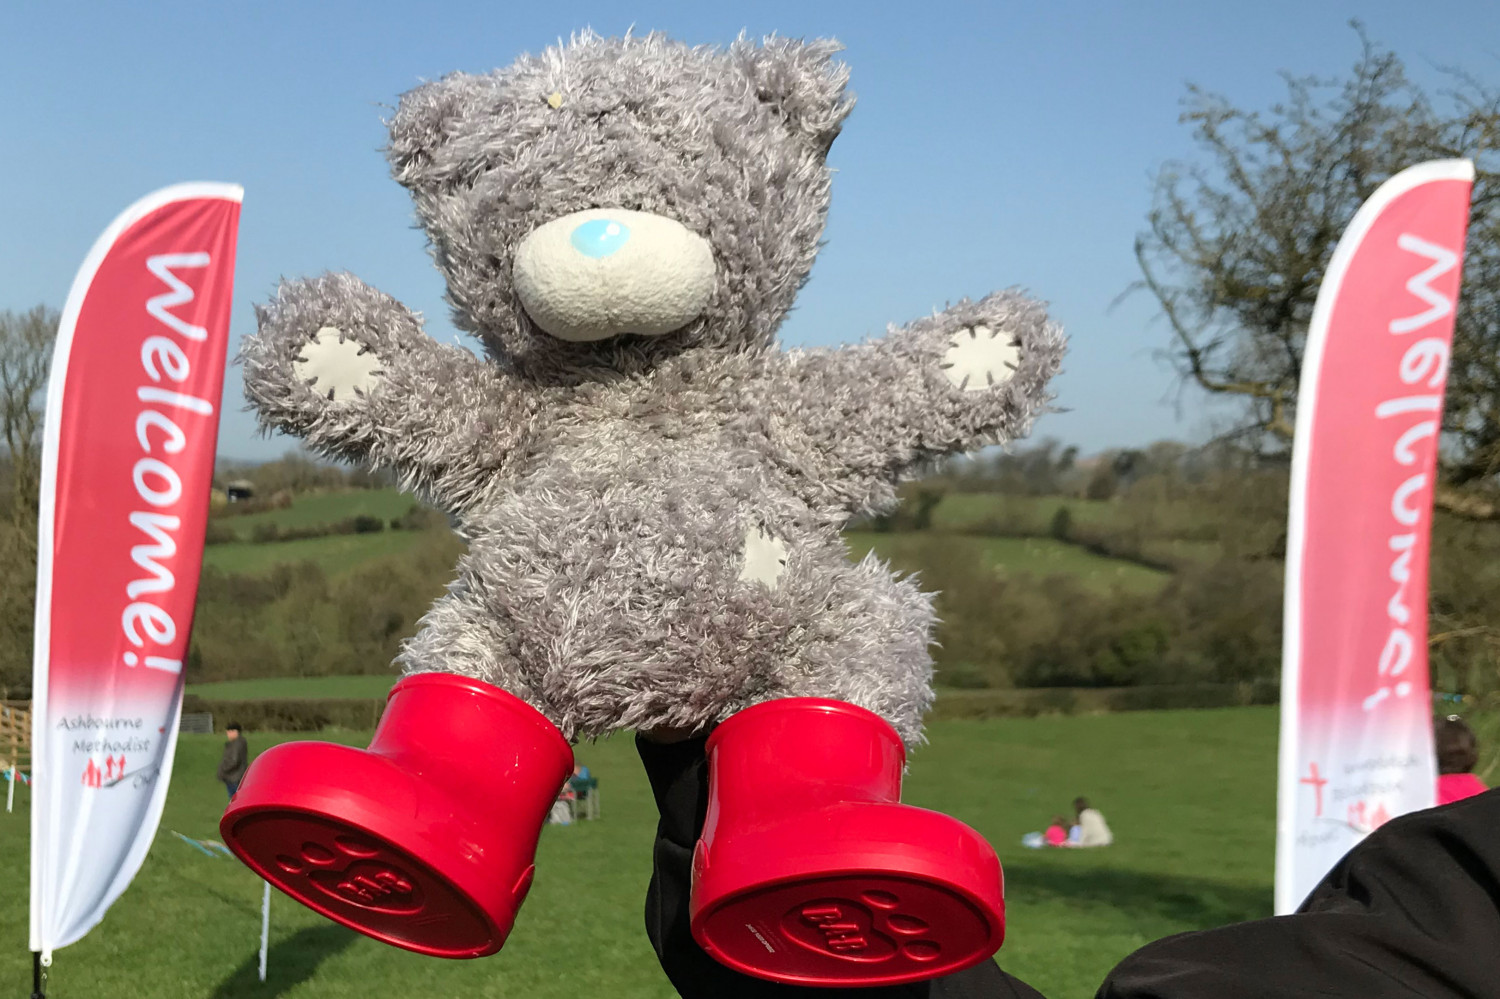 A photo of Share Bear (a soft toy) wearing red wellies